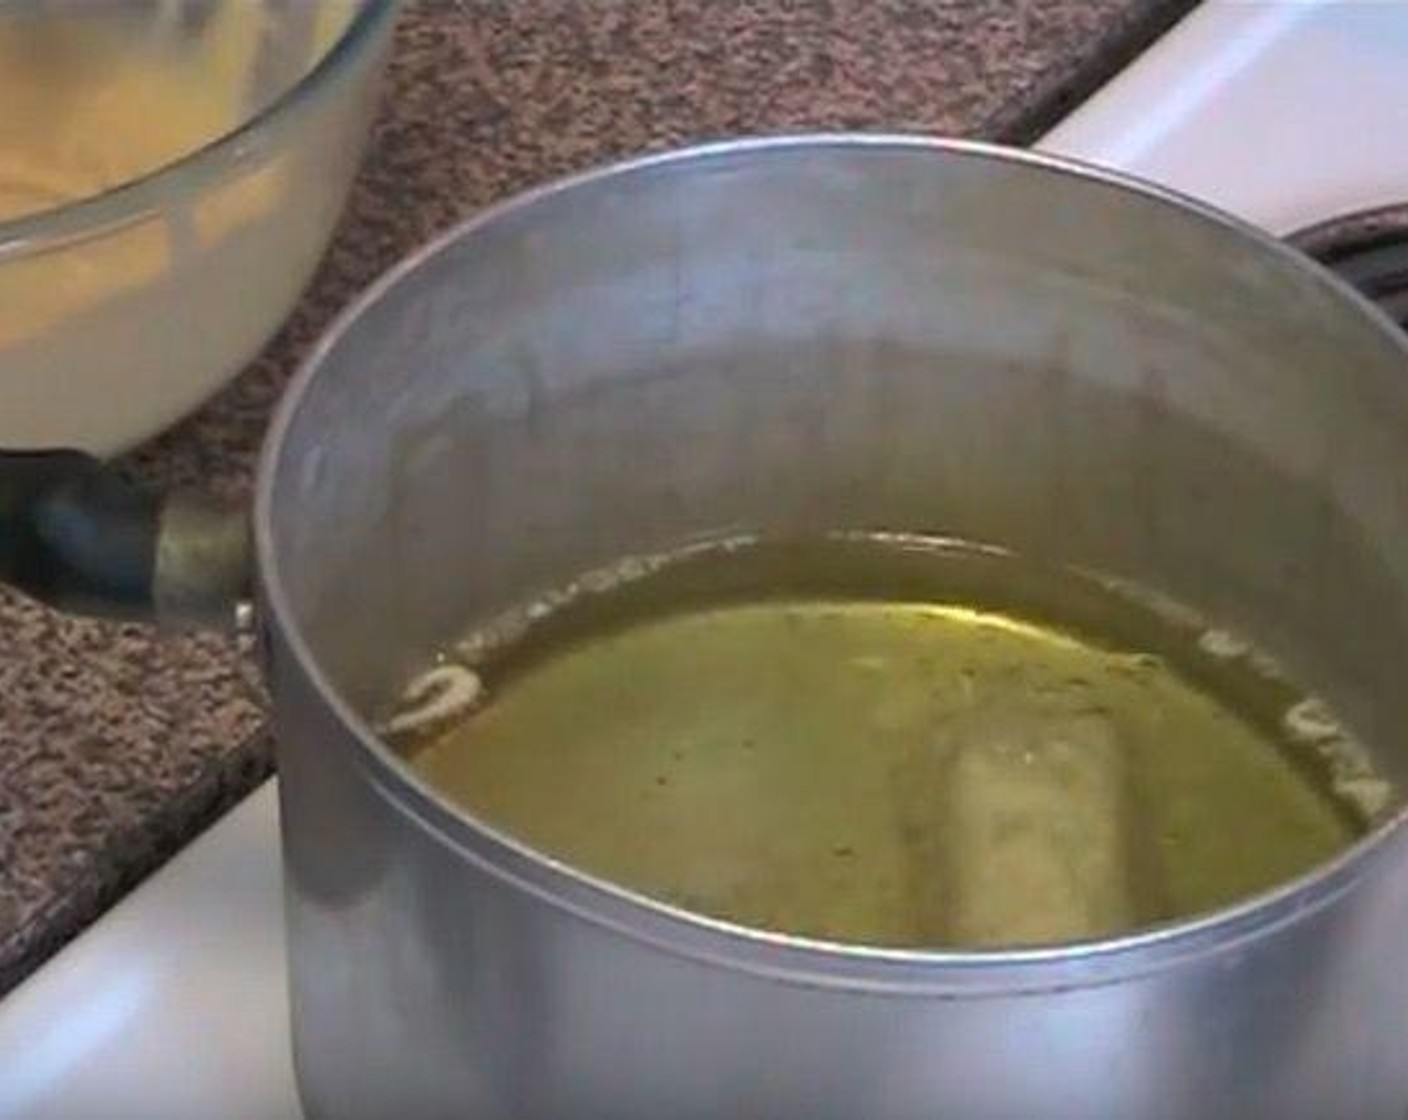 step 3 In a saucepan over medium heat, warm Vegetable Oil (as needed). Drop Mars bars into the oil. Let fry for 1-2 minutes.